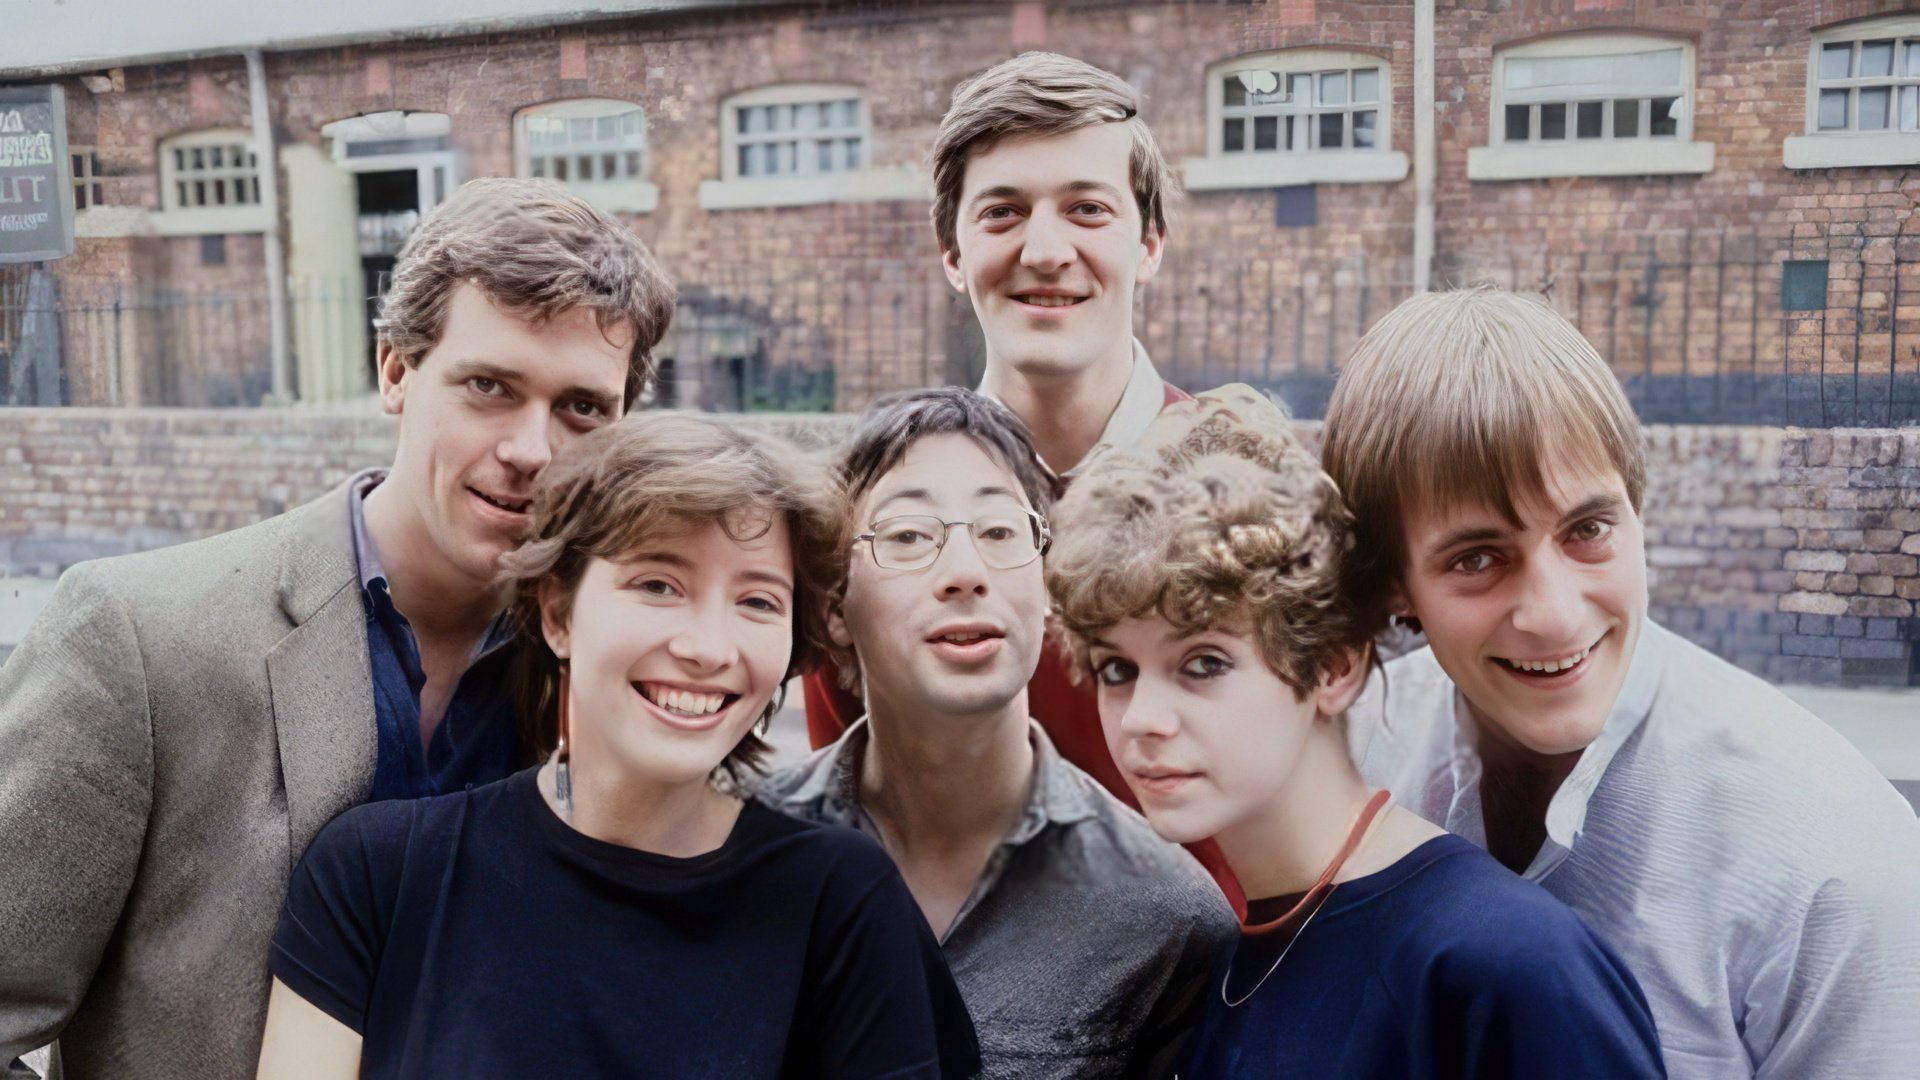 Stephen Fry while his studying at University in Cambridge